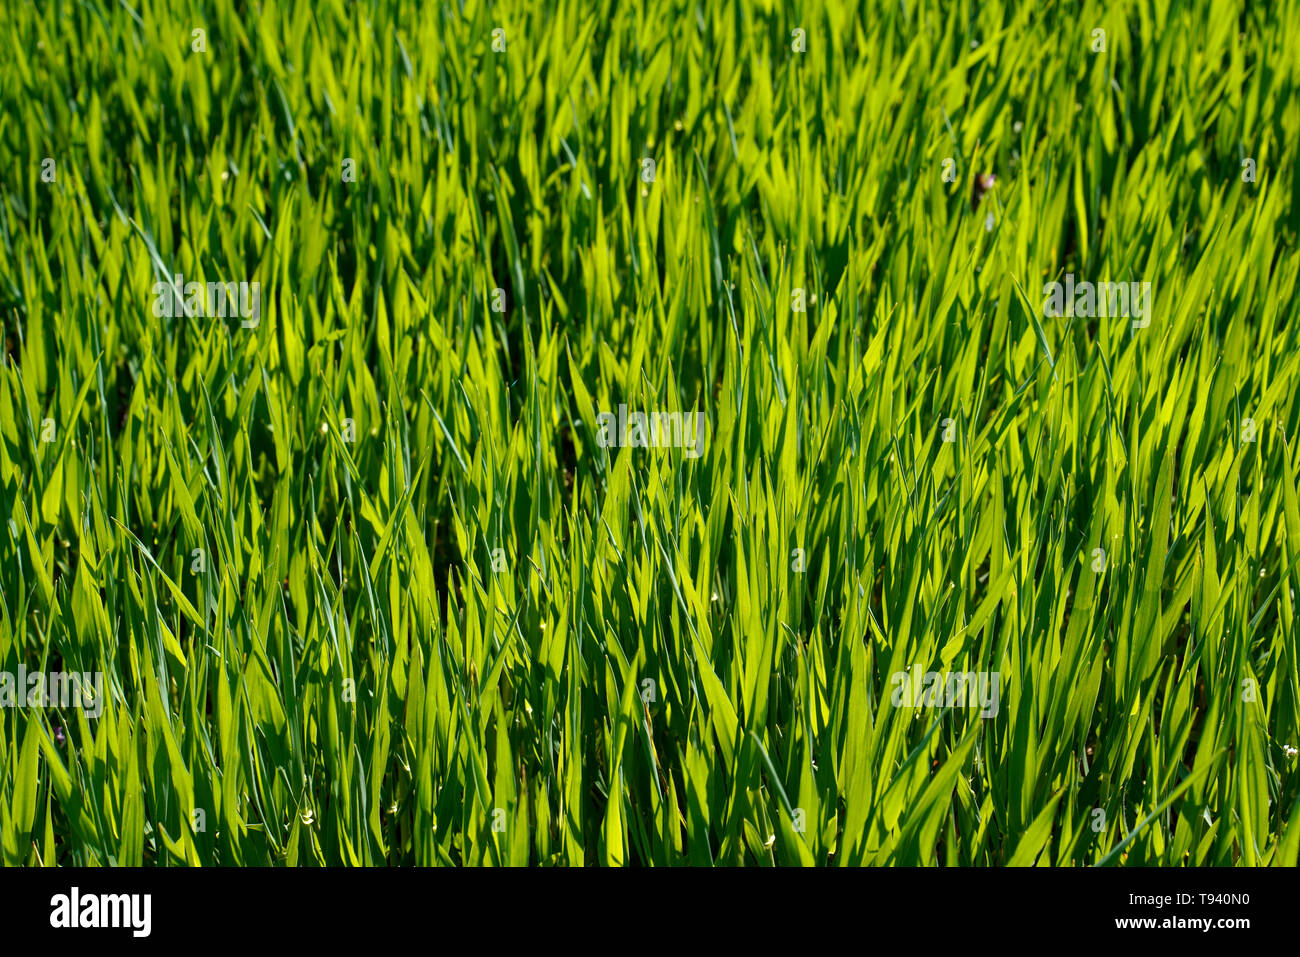 Spring field with cereals Stock Photo